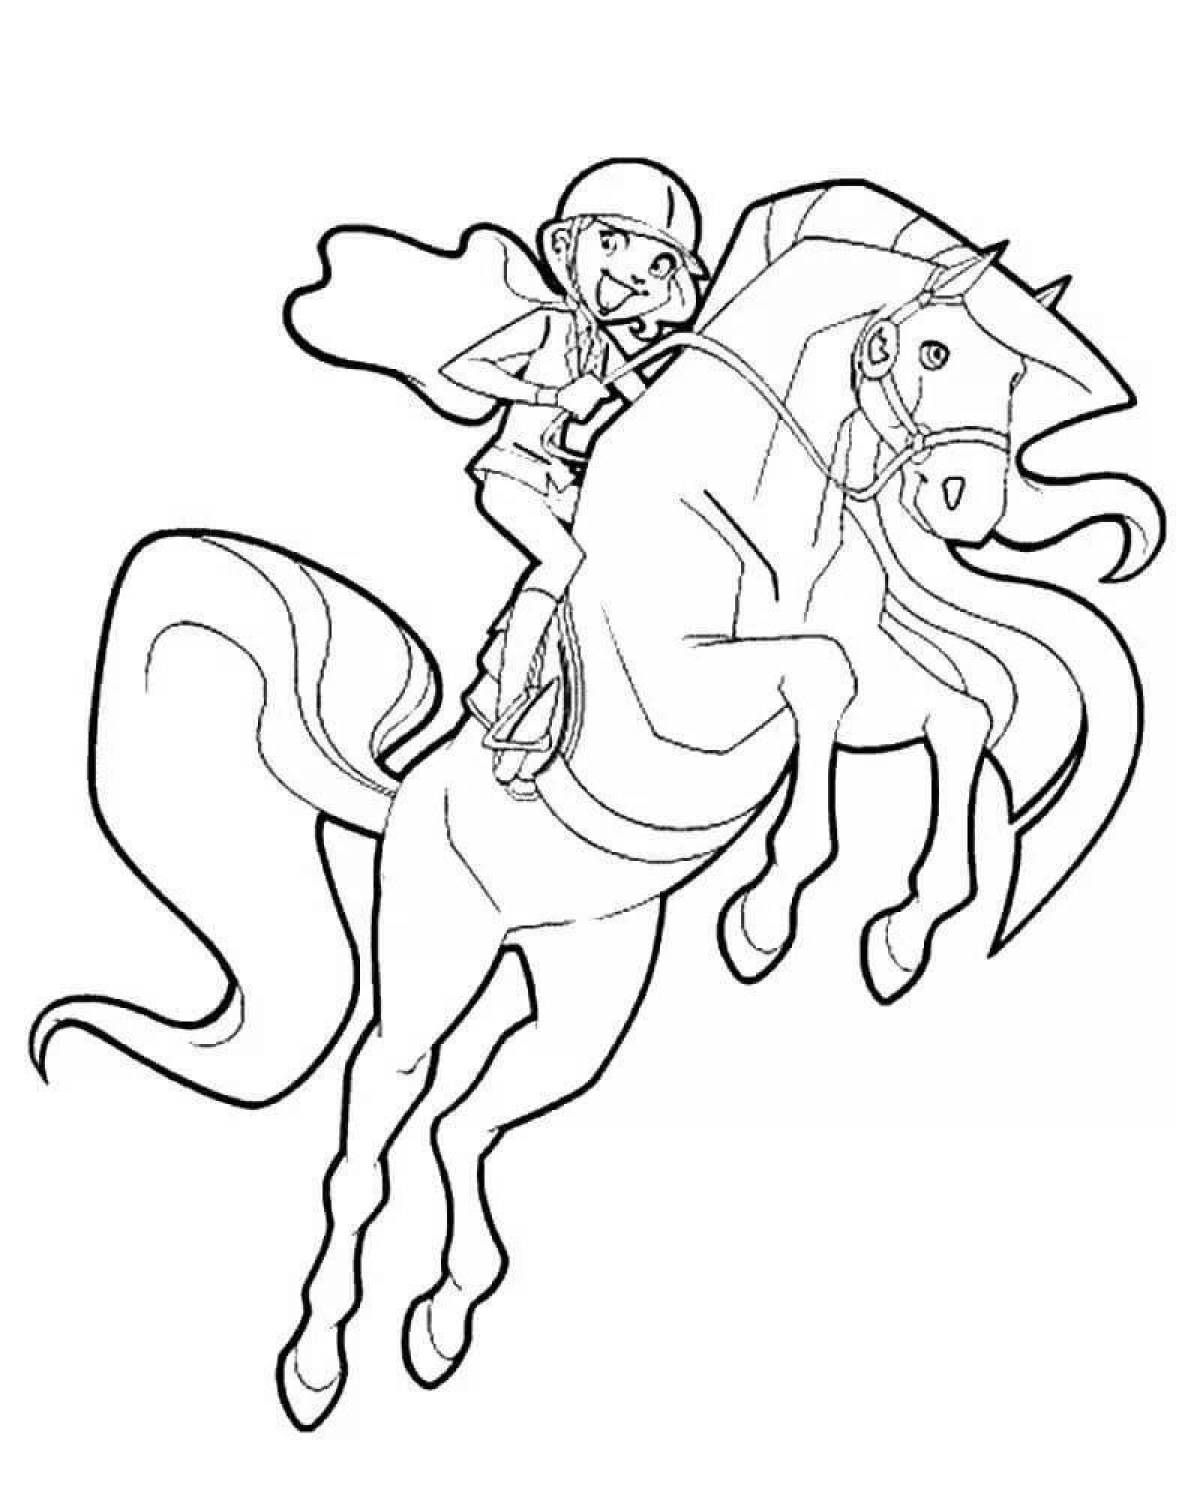 Coloring page charming land of horses